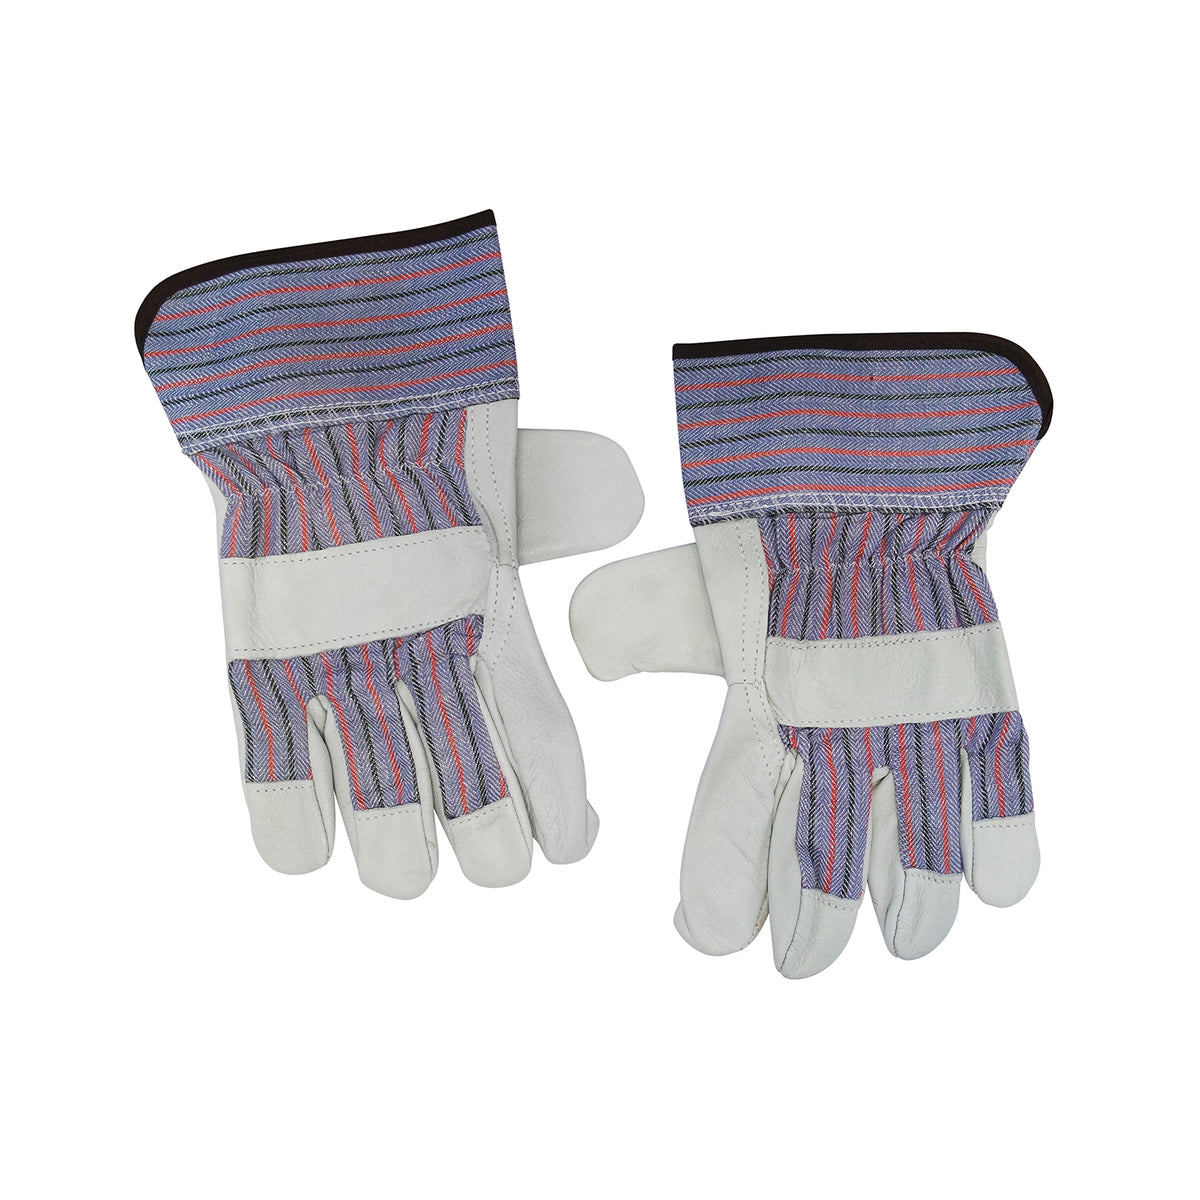 Leather Palm Gloves -Safety- eGPS Solutions Inc.